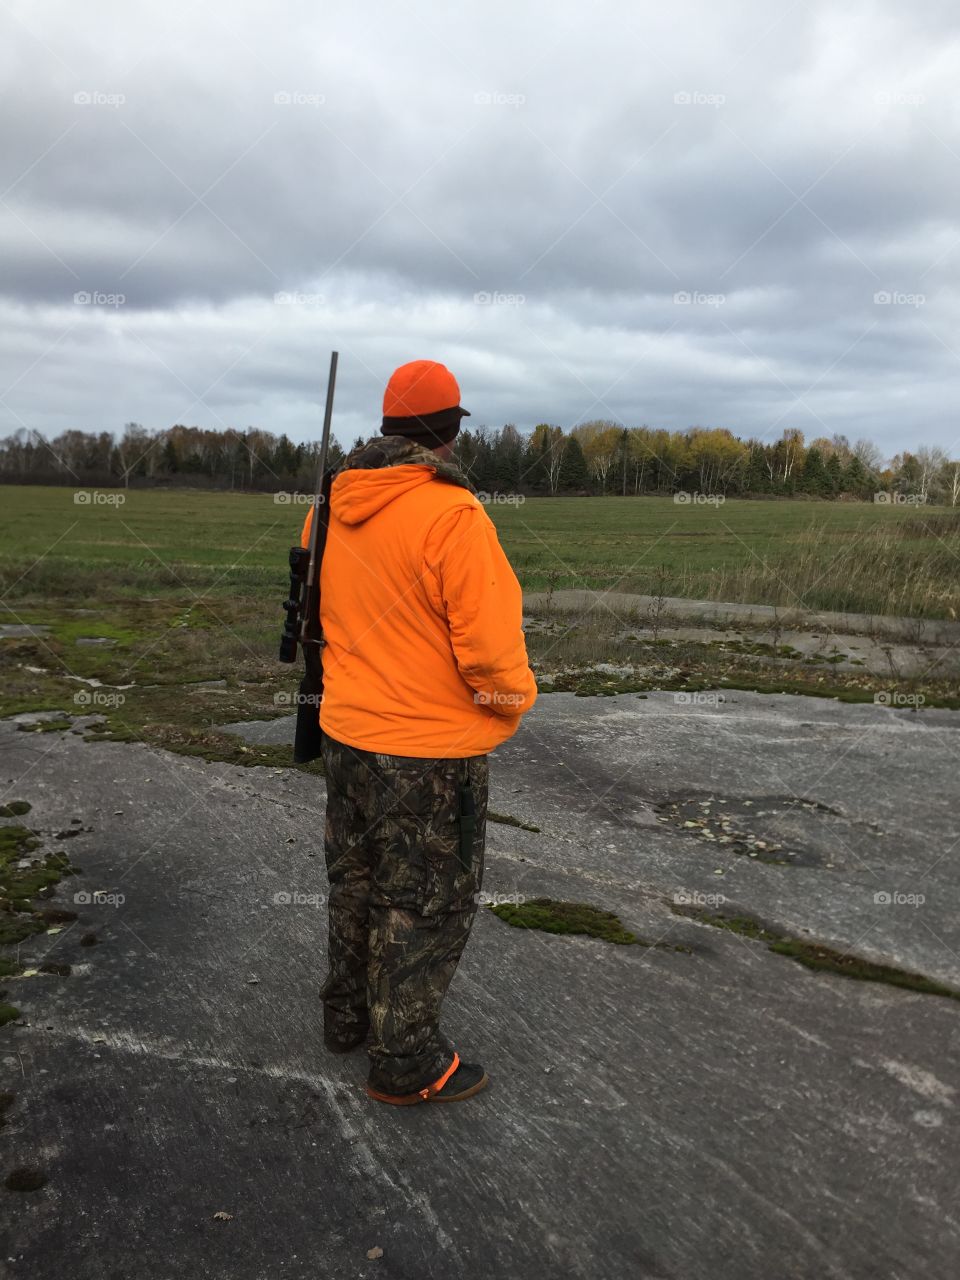  crisp Cool sunny day getting ready for the hunt sporting his orange and camouflage gear .The sport at the Hunt